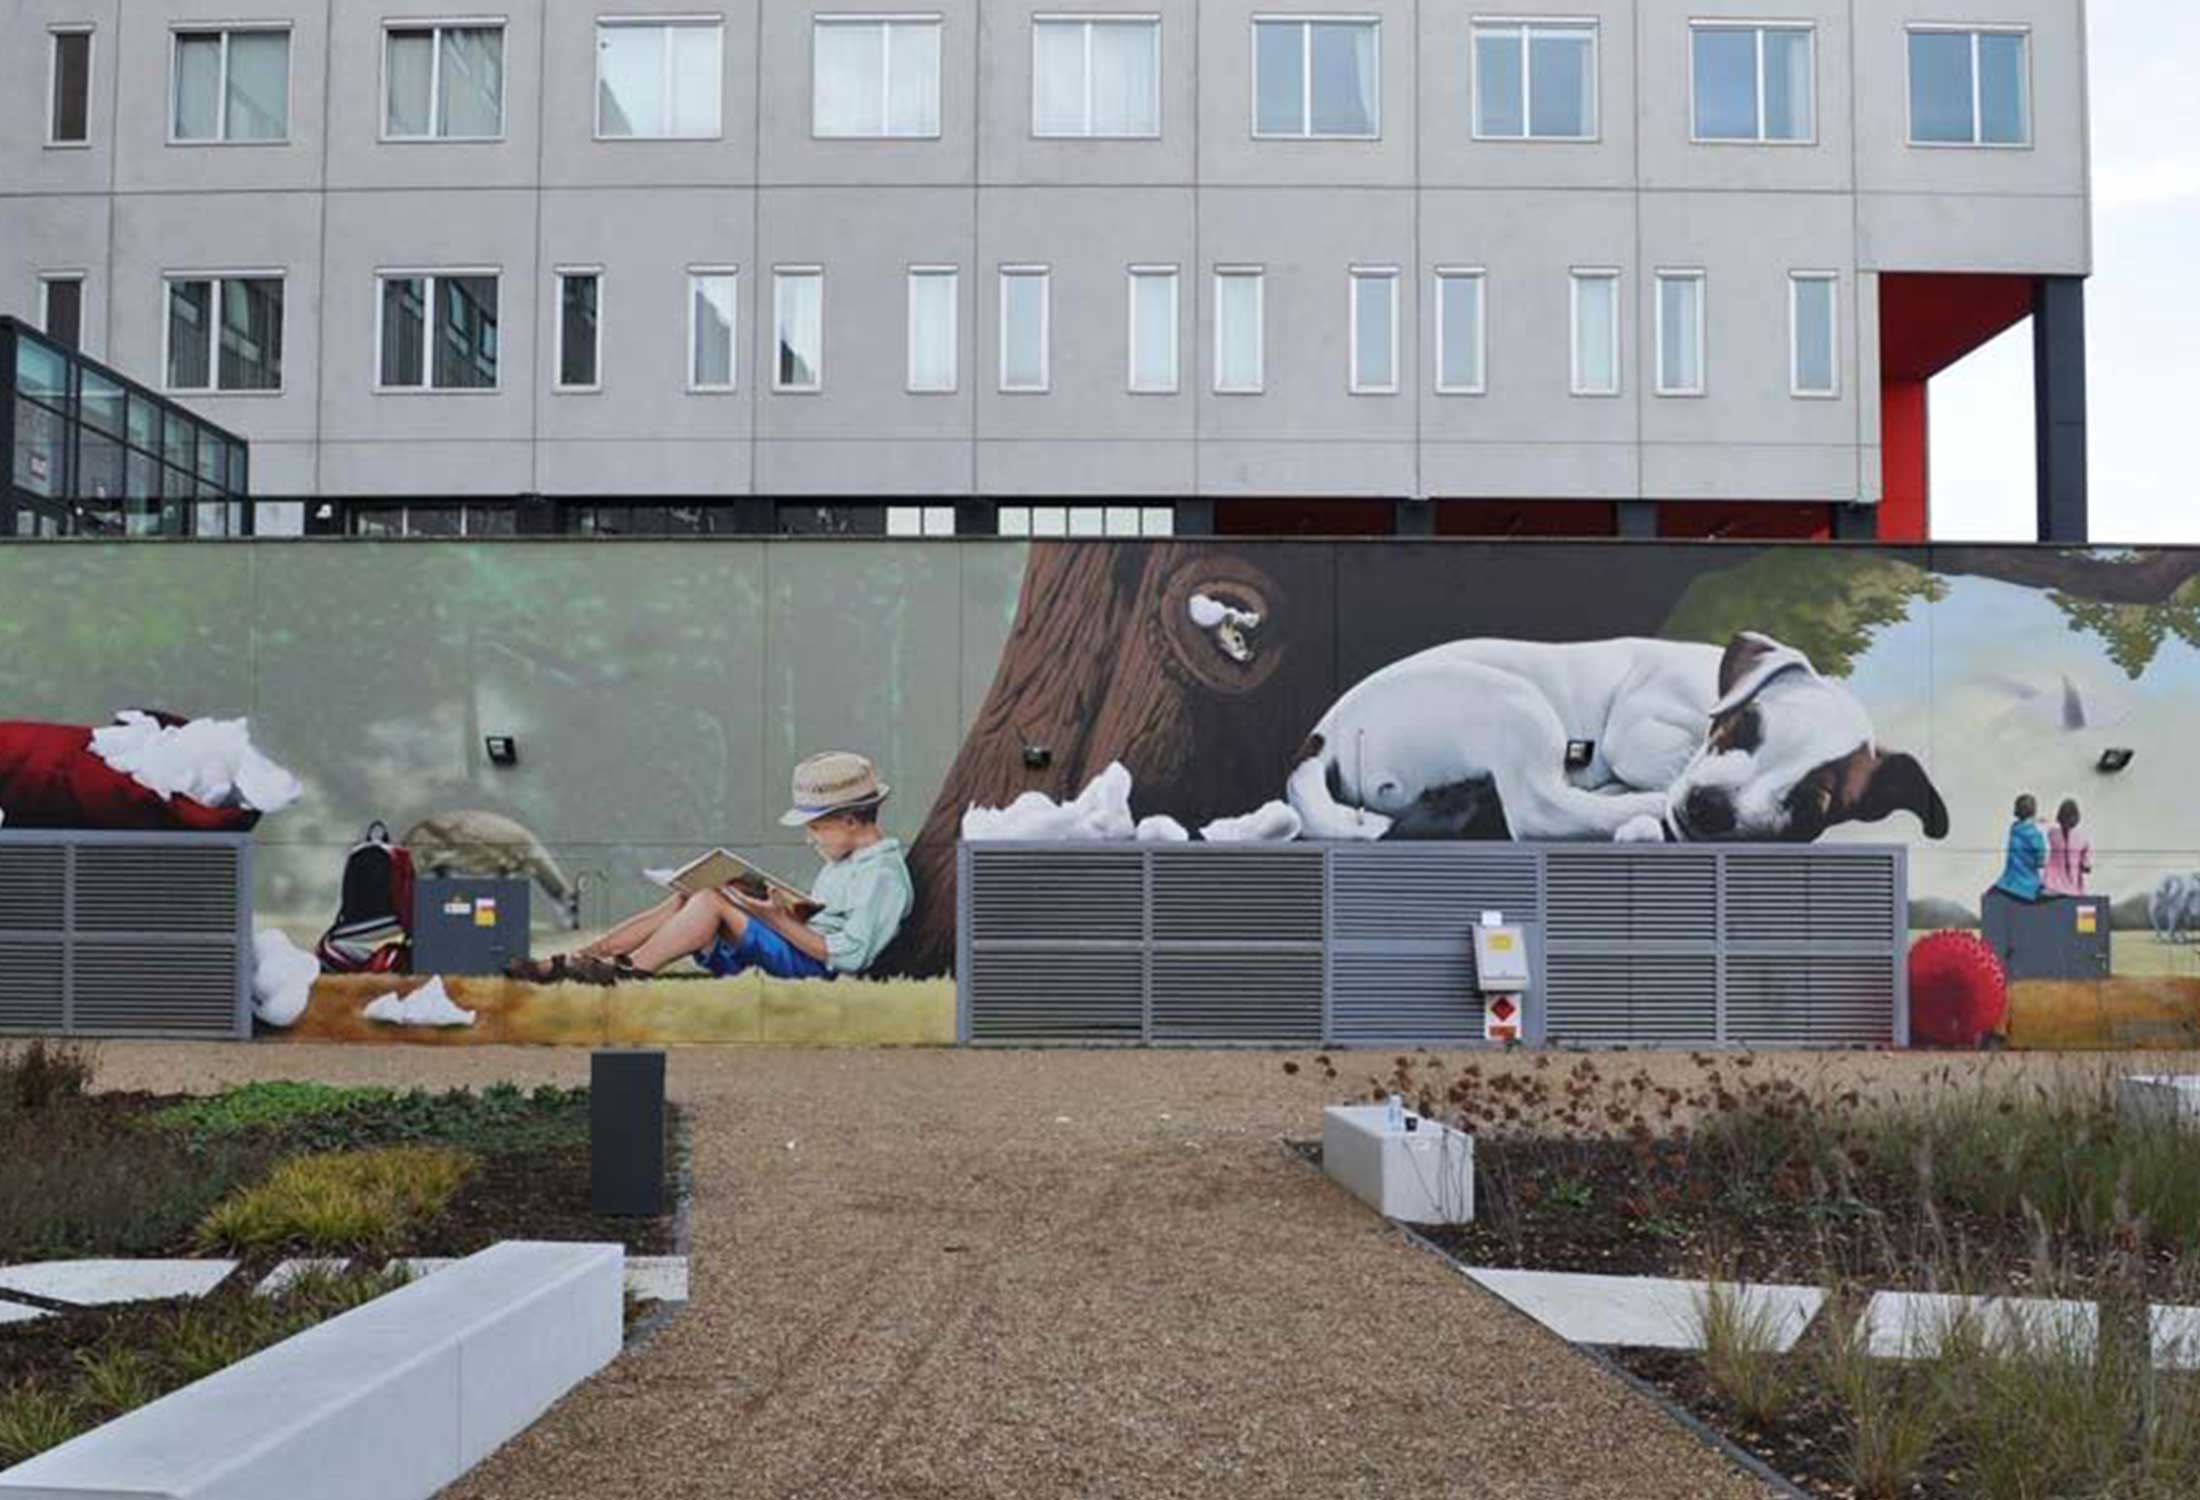 Bart Smeets used the magic of art in public places to transform an office space outdoor area into a relaxing retreat with a beautiful mural that boosts the value of the rental property